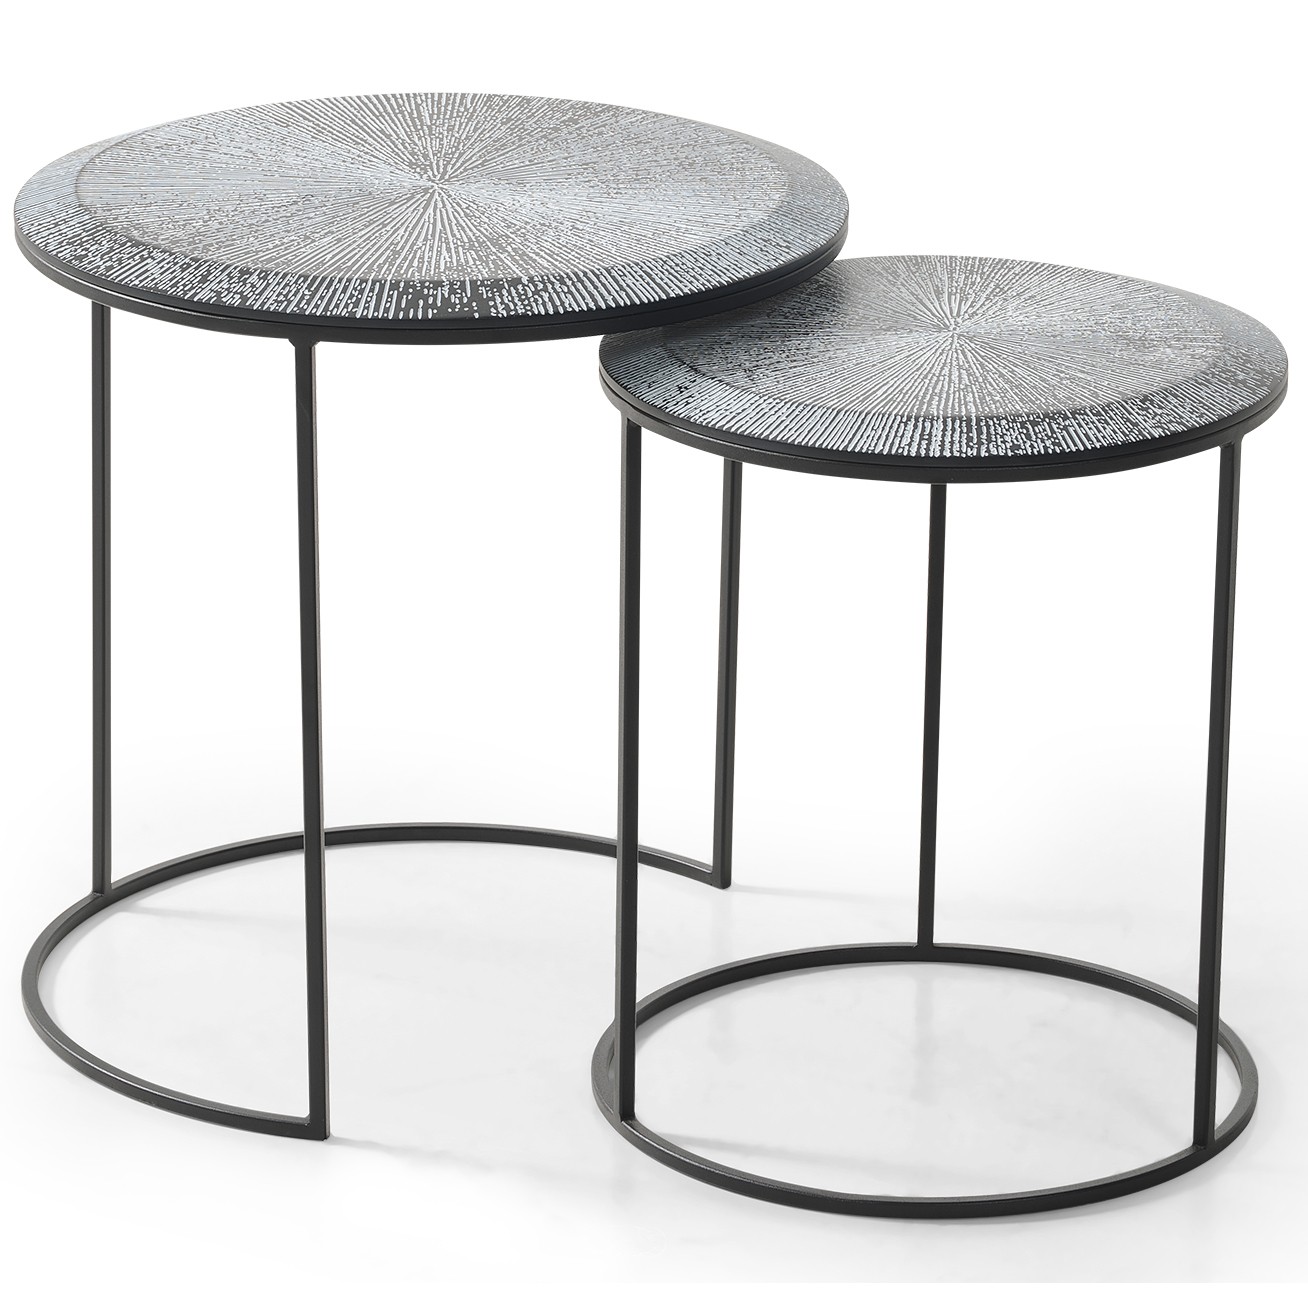 SHW789 Vol2 Side Tables